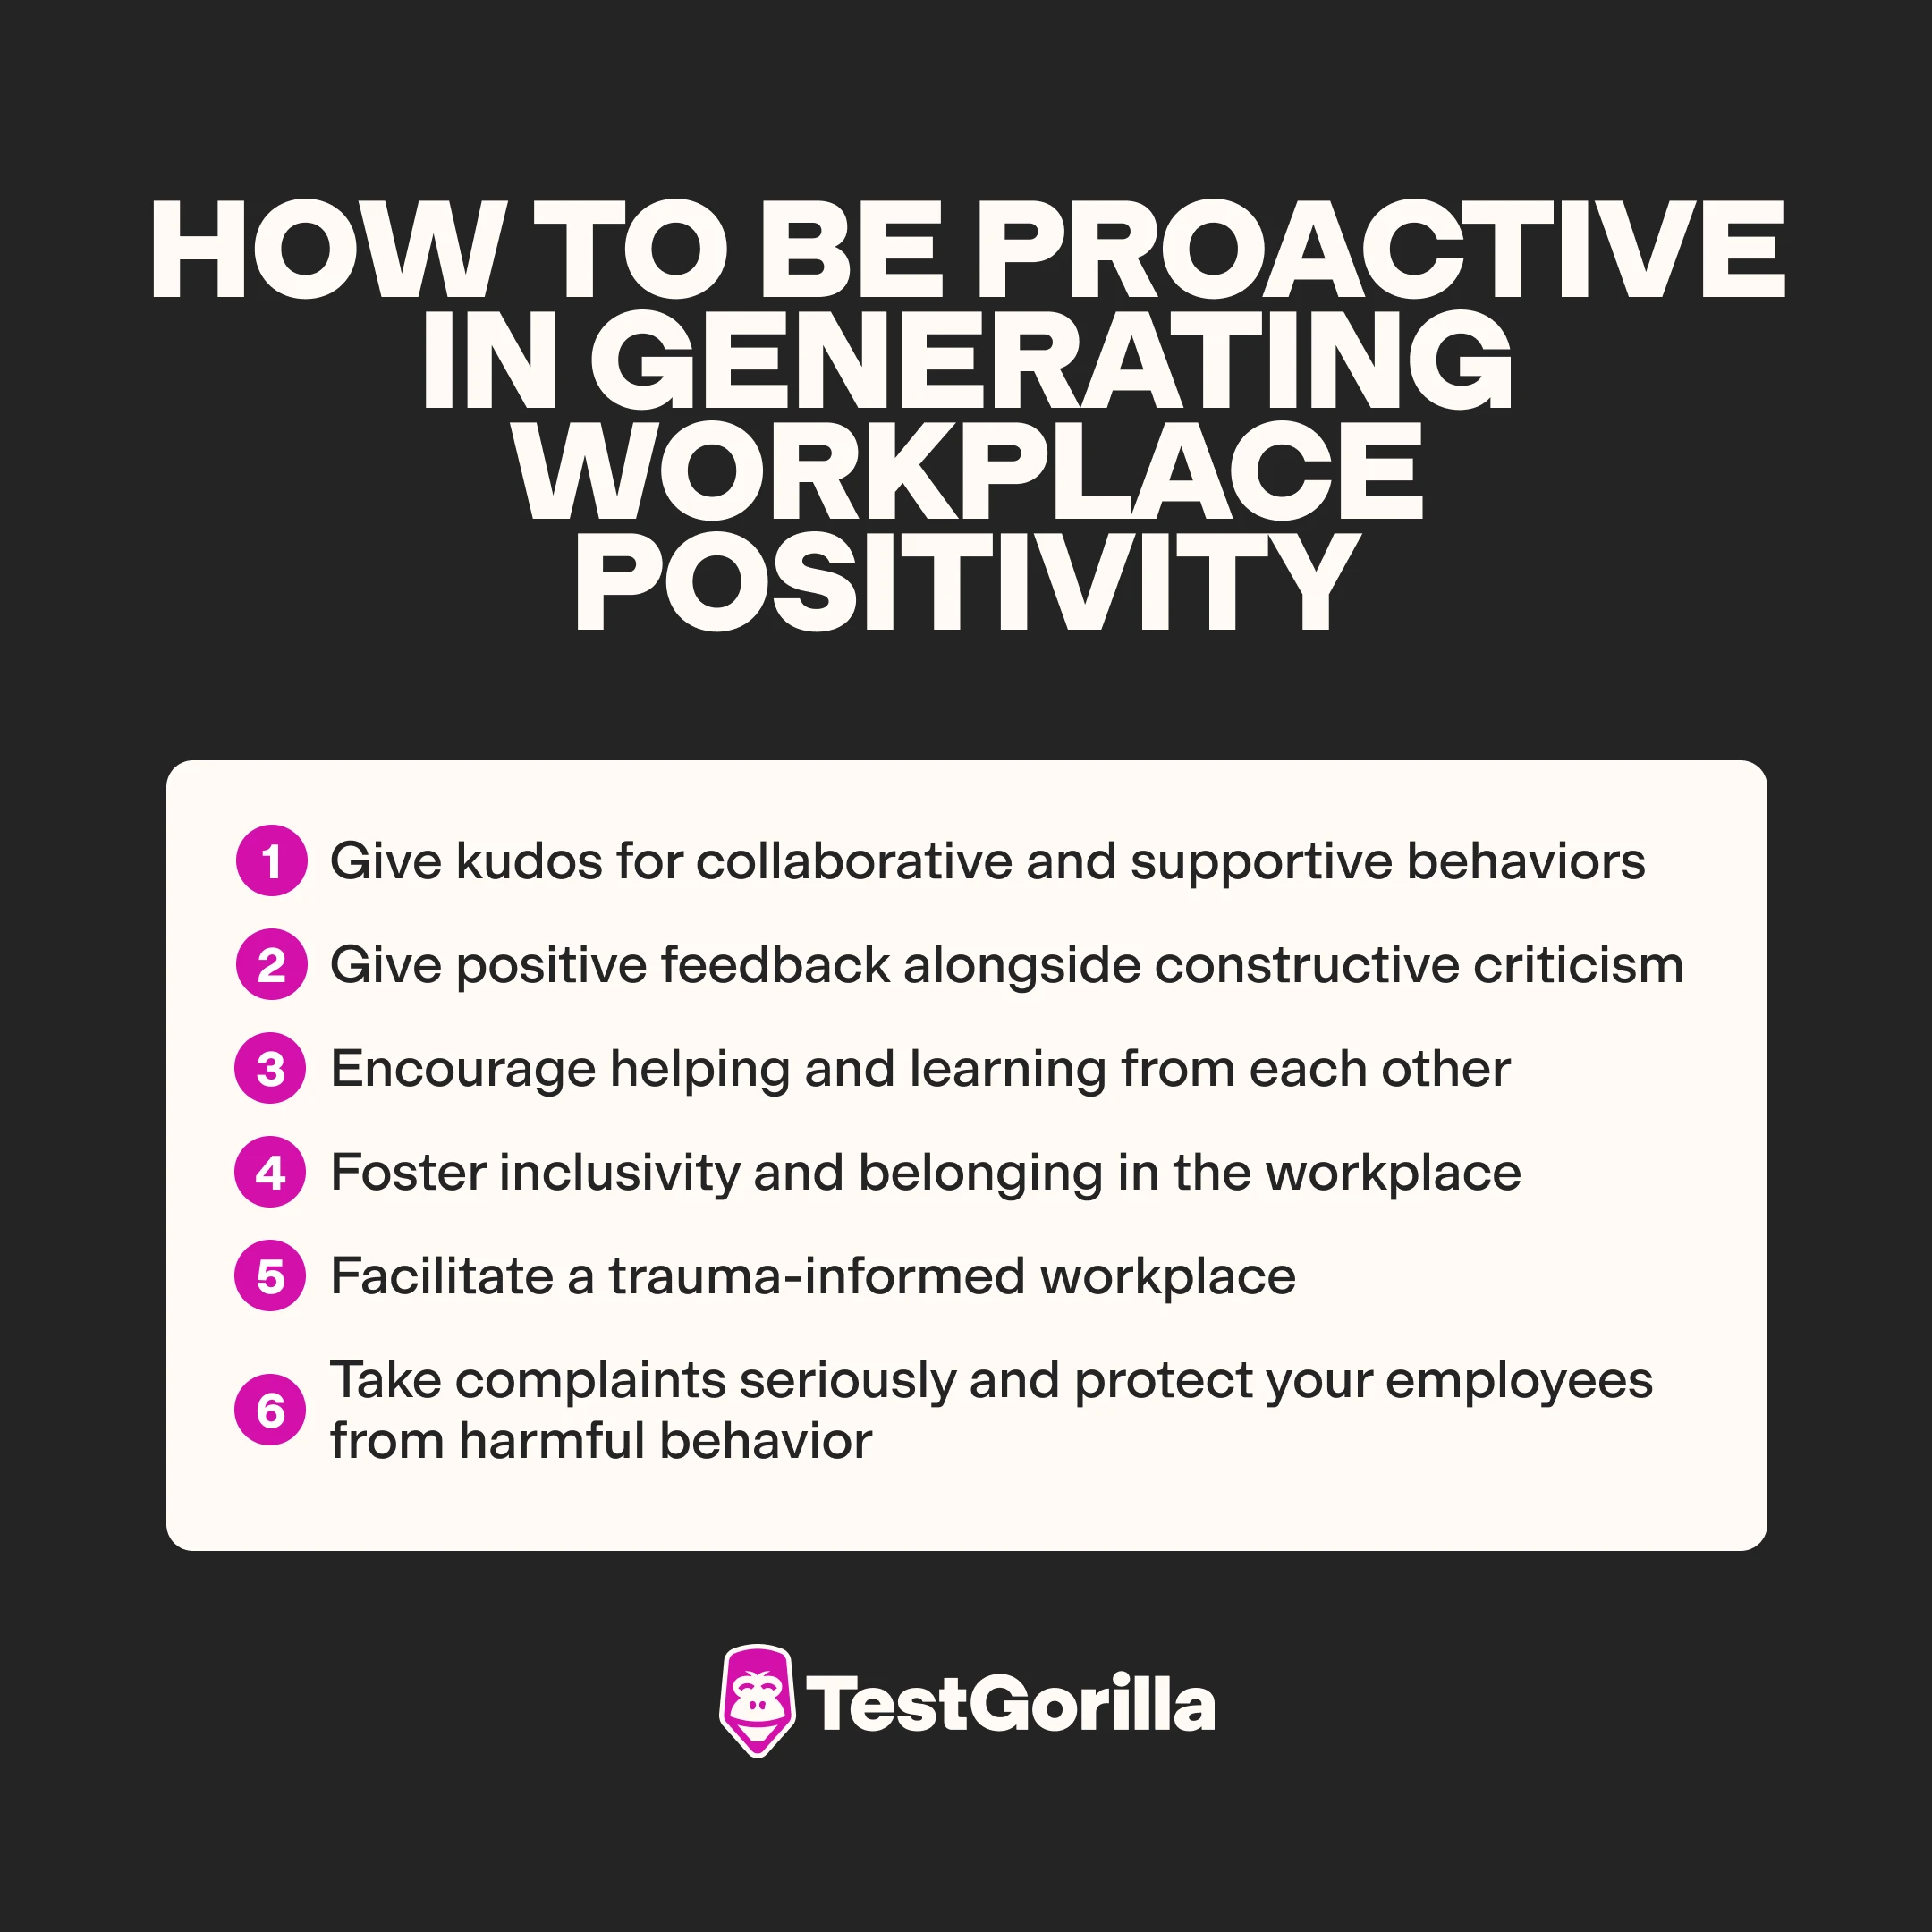 How-to-be-proactive-in-generating-workplace-positivity graphic